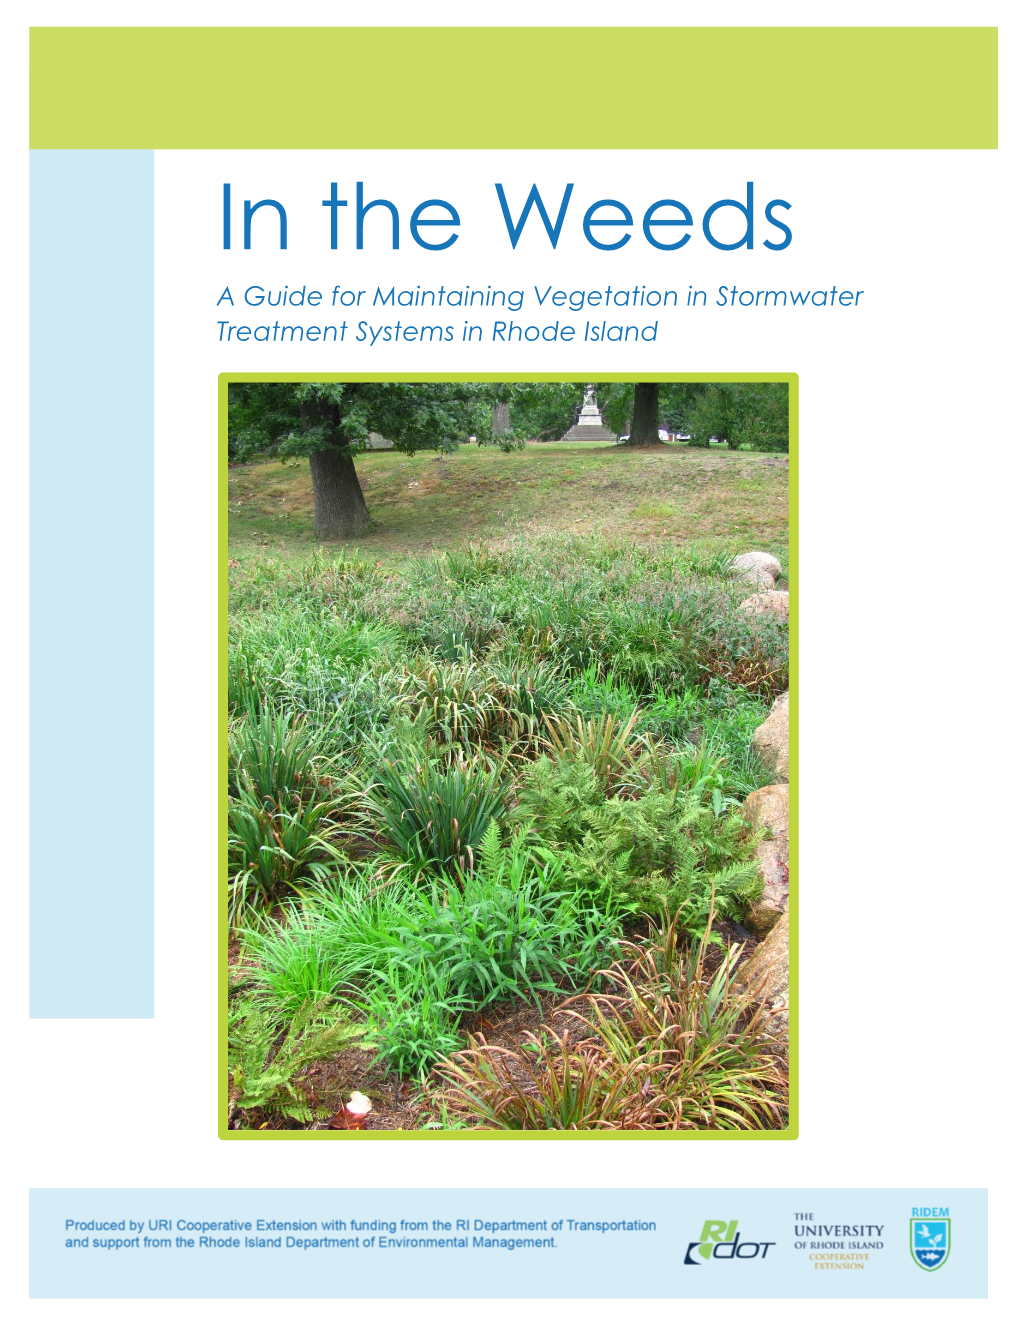 In the Weeds a Guide for Maintaining Vegetation in Stormwater Treatment Systems in Rhode Island